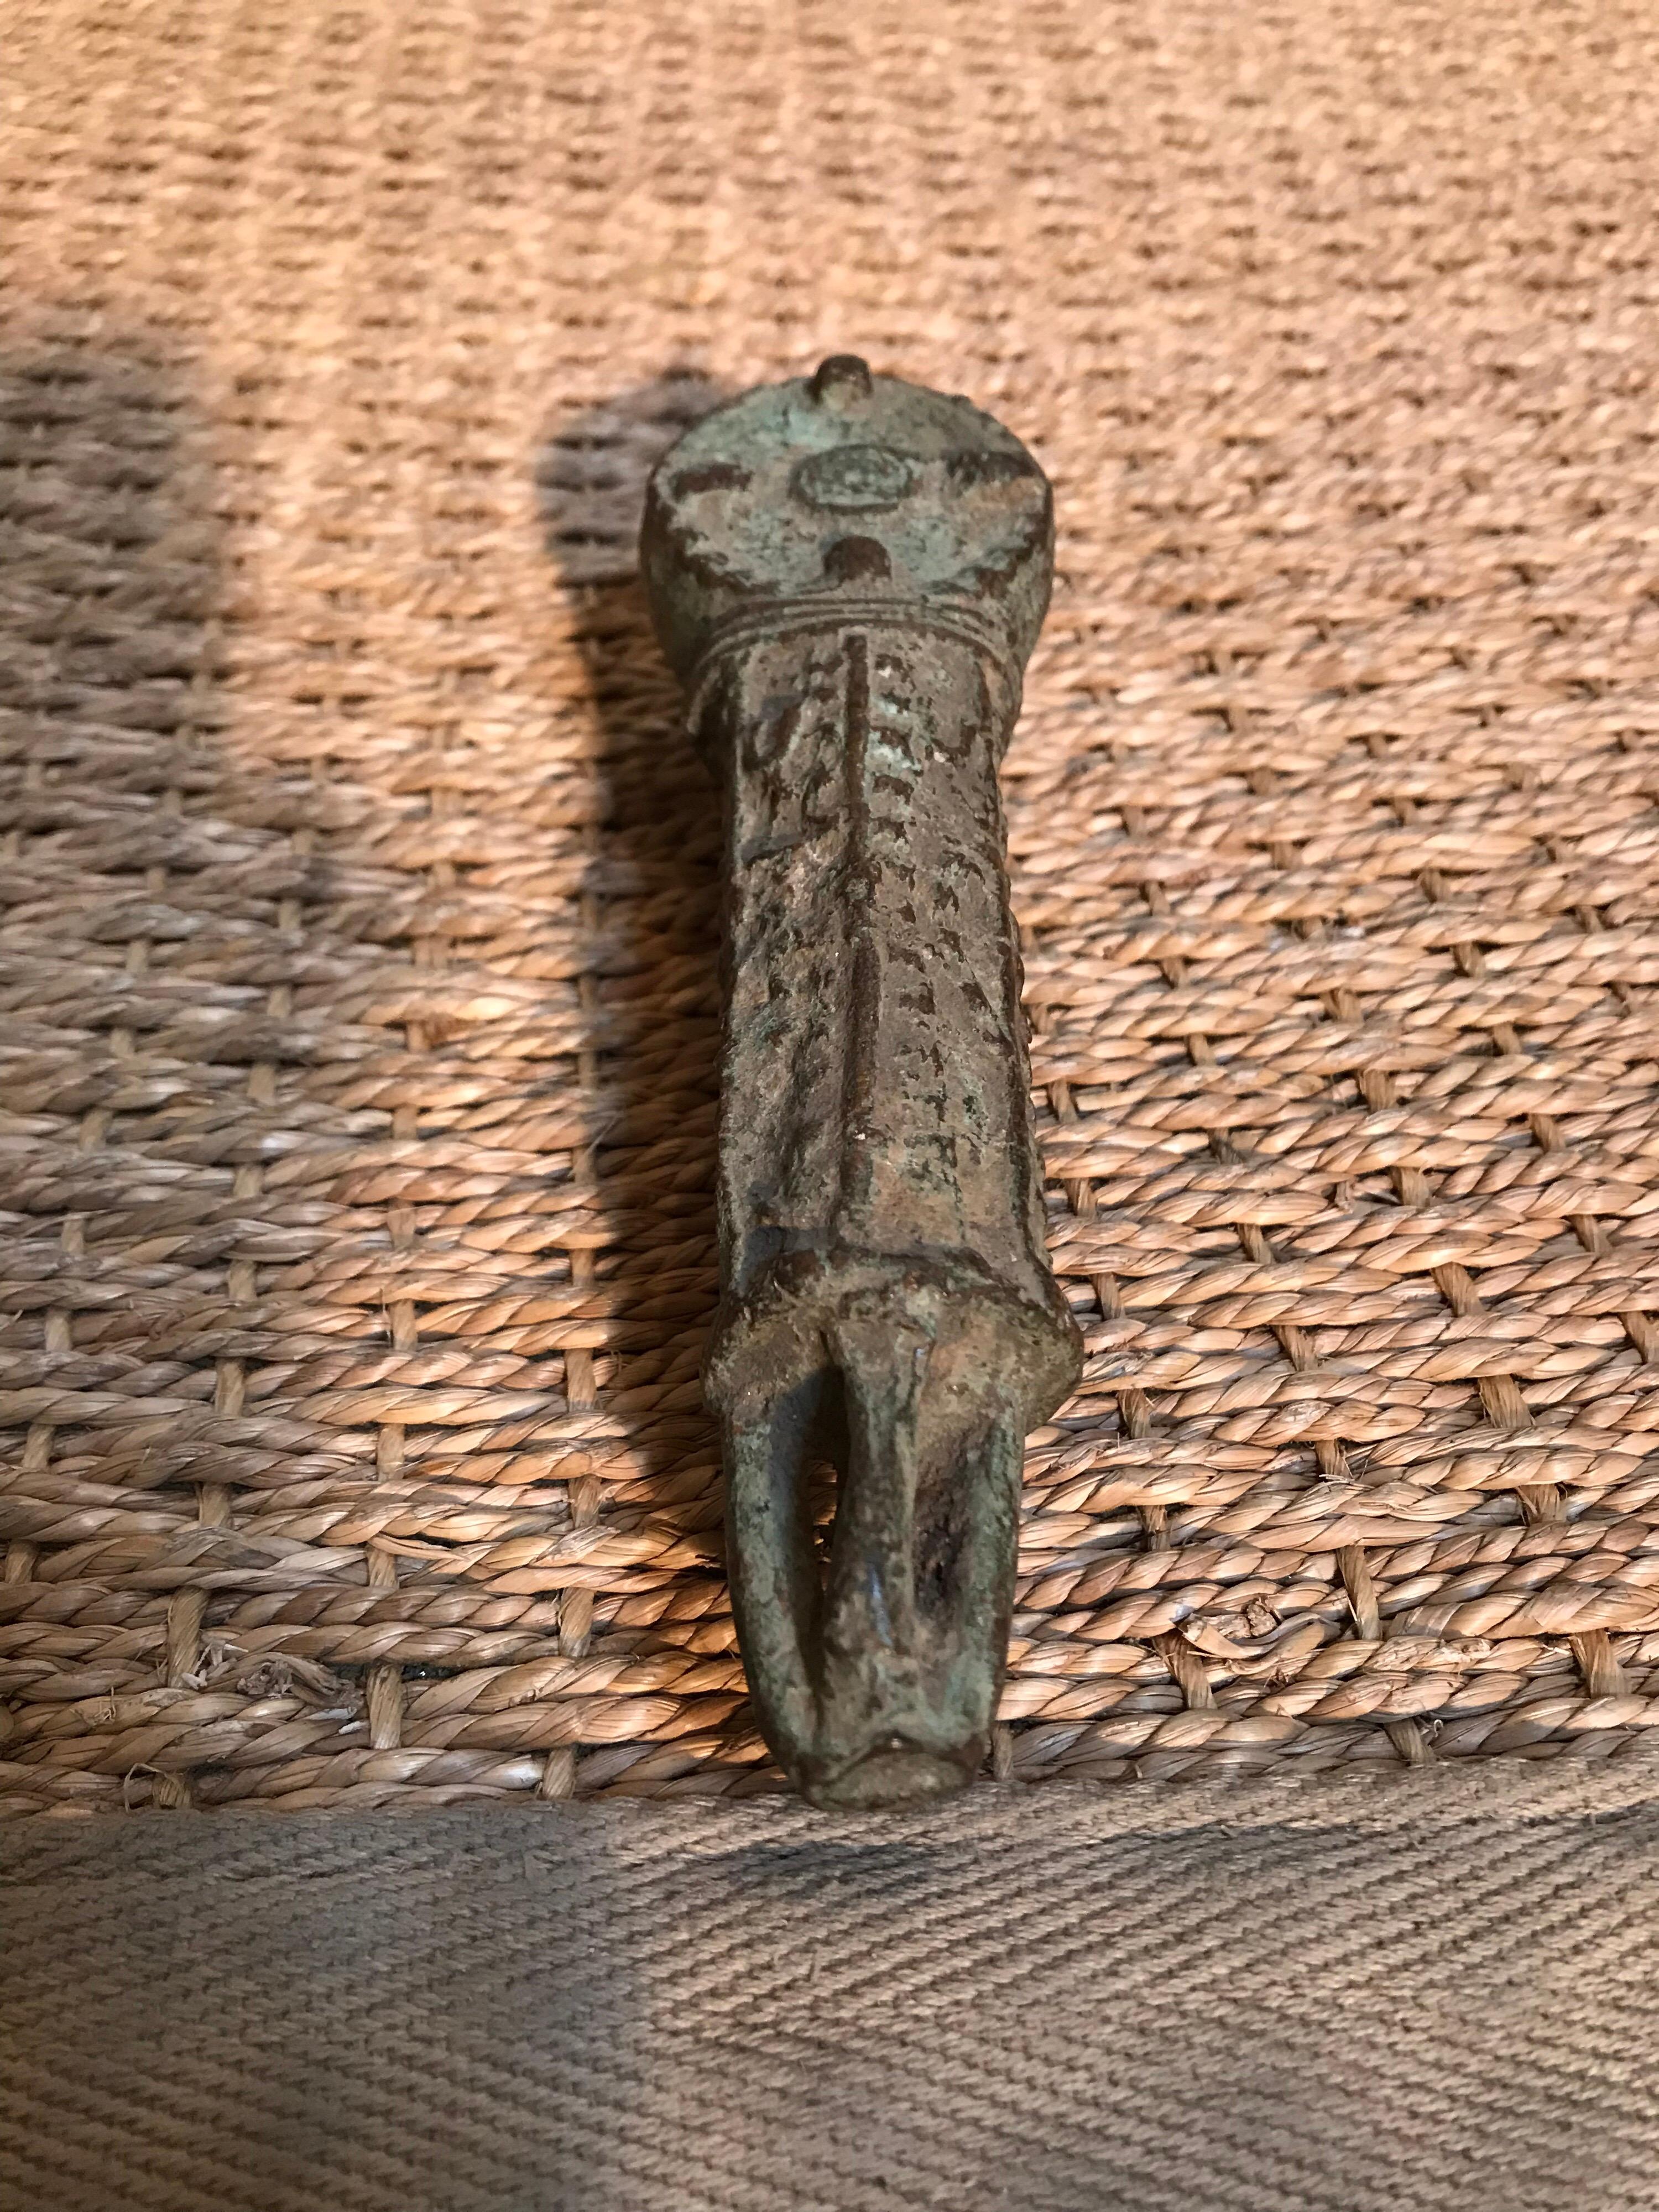 This 19th century harvest African currency is from the Ibo tribe in Nigeria. It looks something like an animal and reminds of a crocodile. One of the end sections is slatted so as to allow the user to tote the item around on a tether, displaying